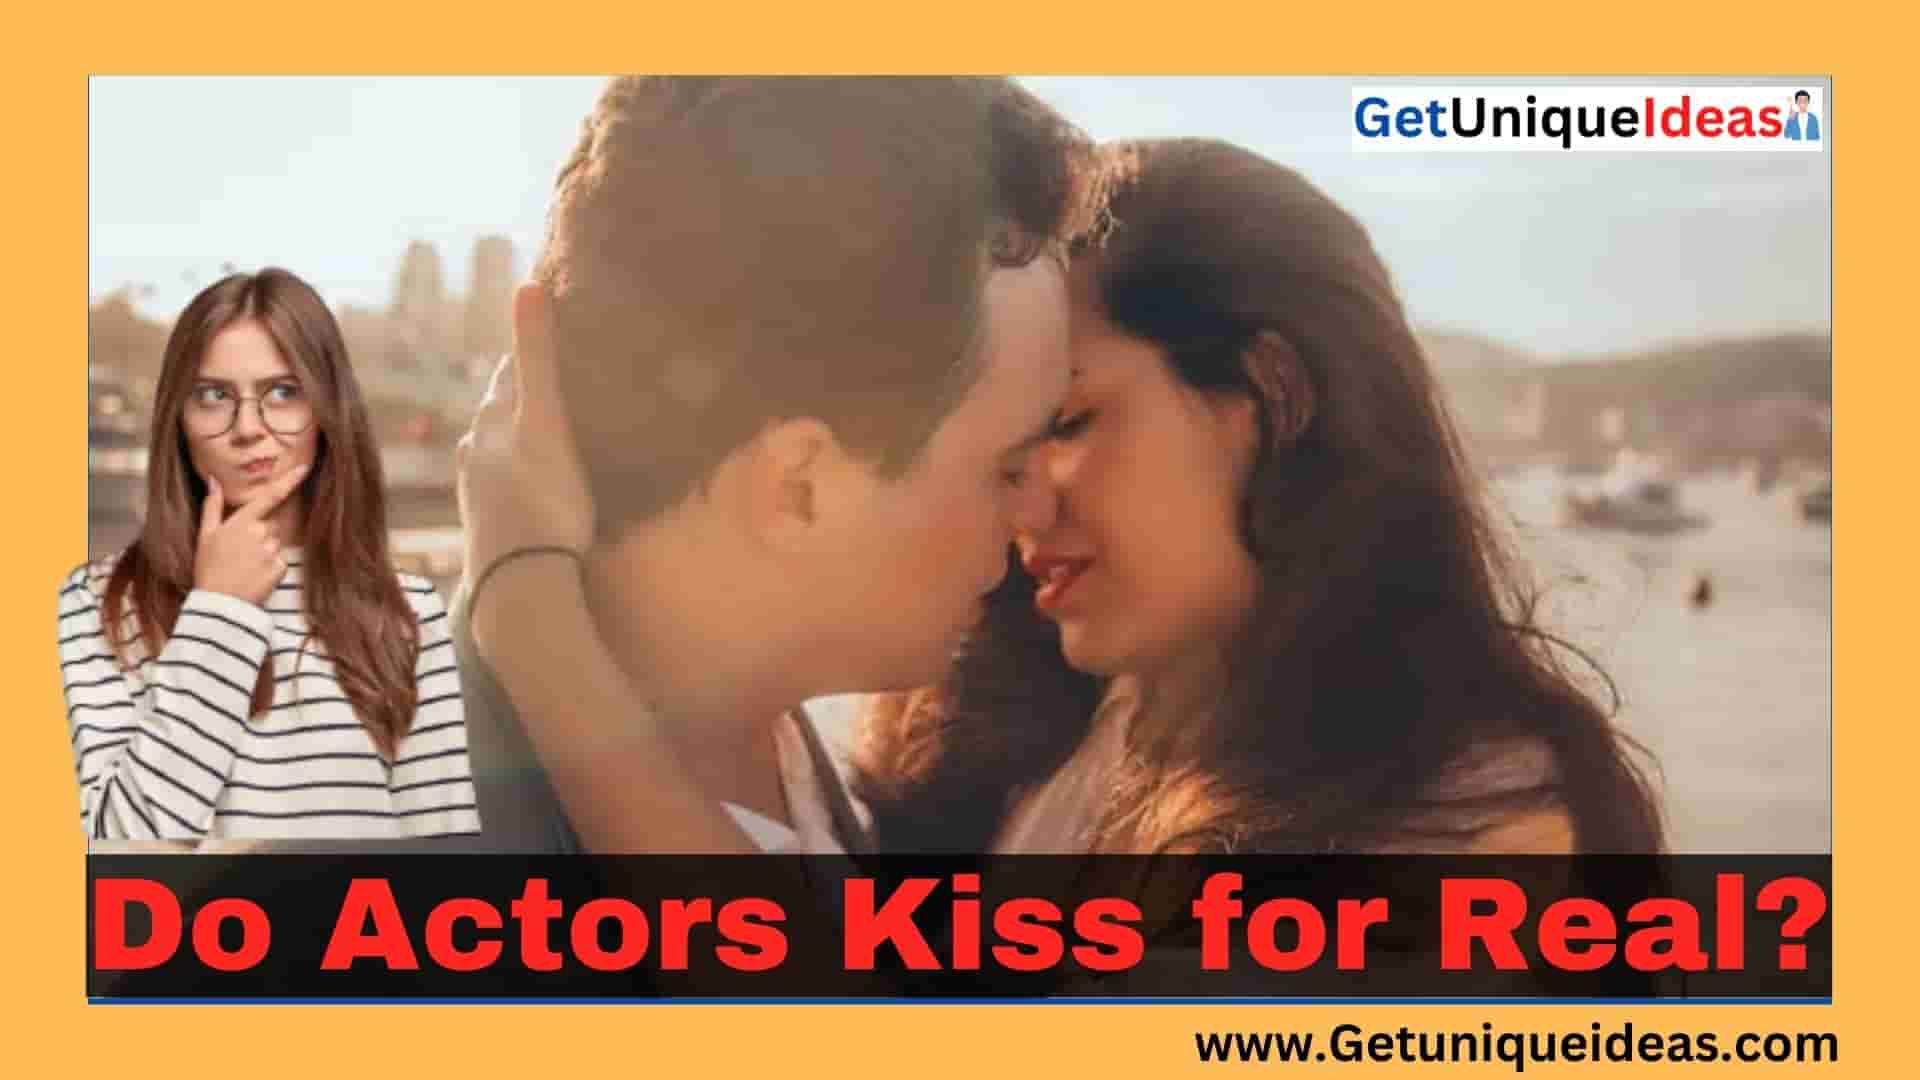 Do Actors Kiss for Real?